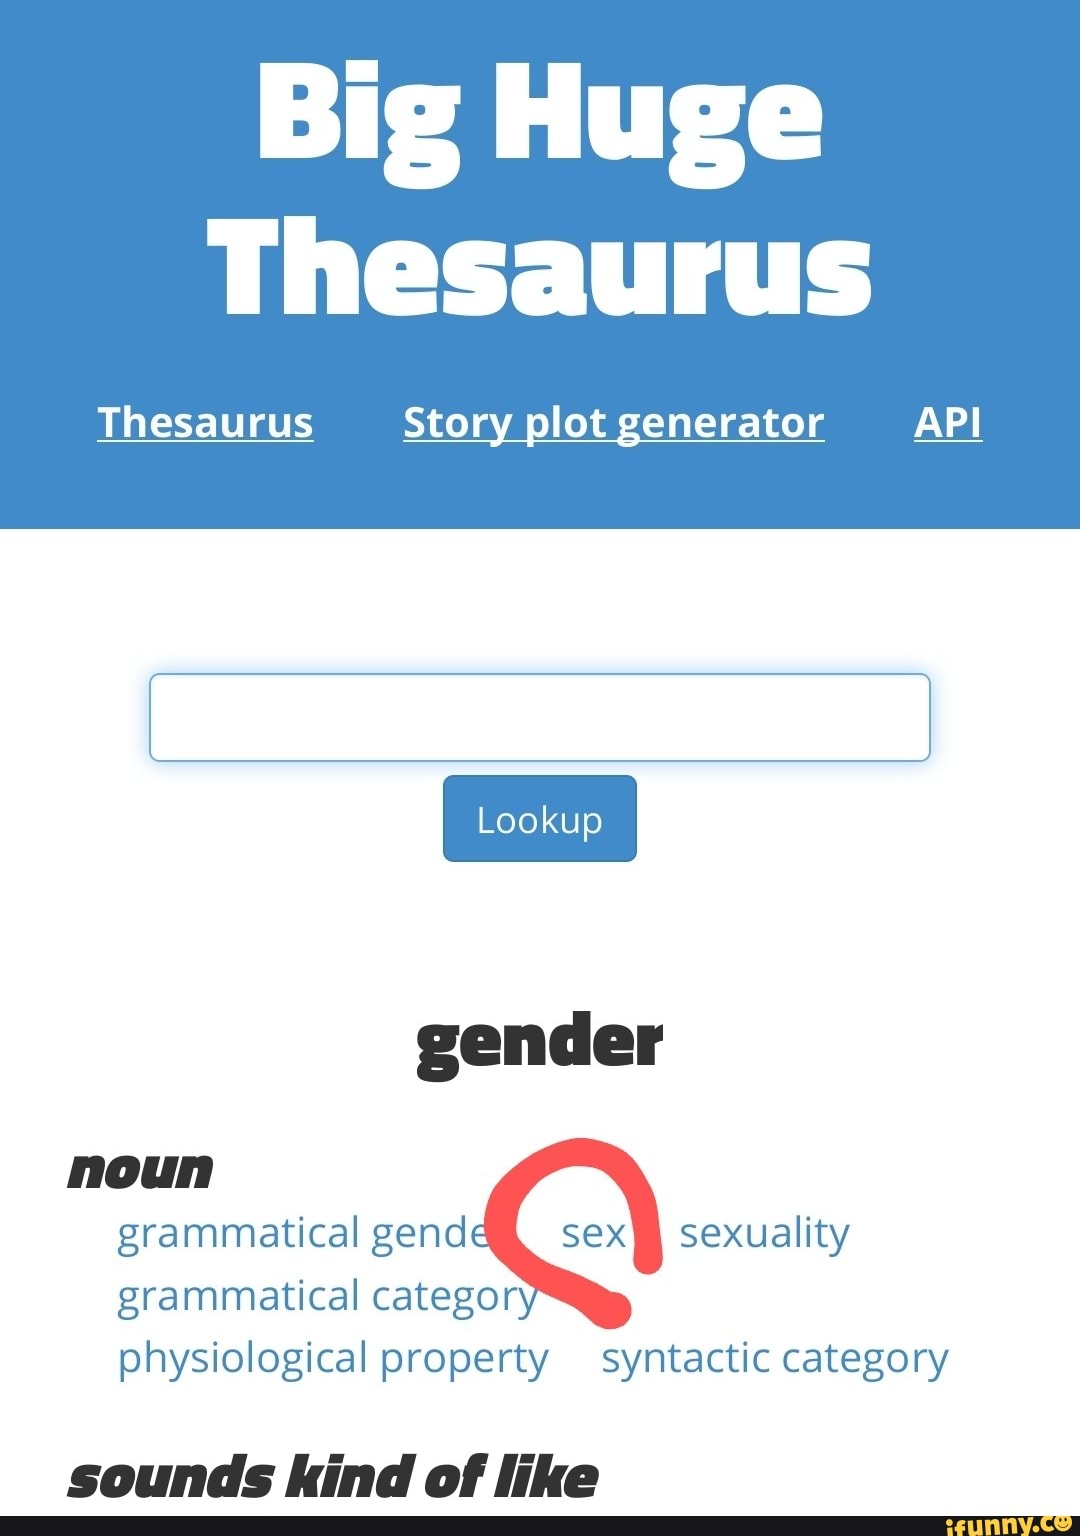 Big Huge Thesaurus Thesaurus Story plot generator API gender grammatical gend sex I sexuality grammatical category physiological property syntactic category noun sounds kind of like